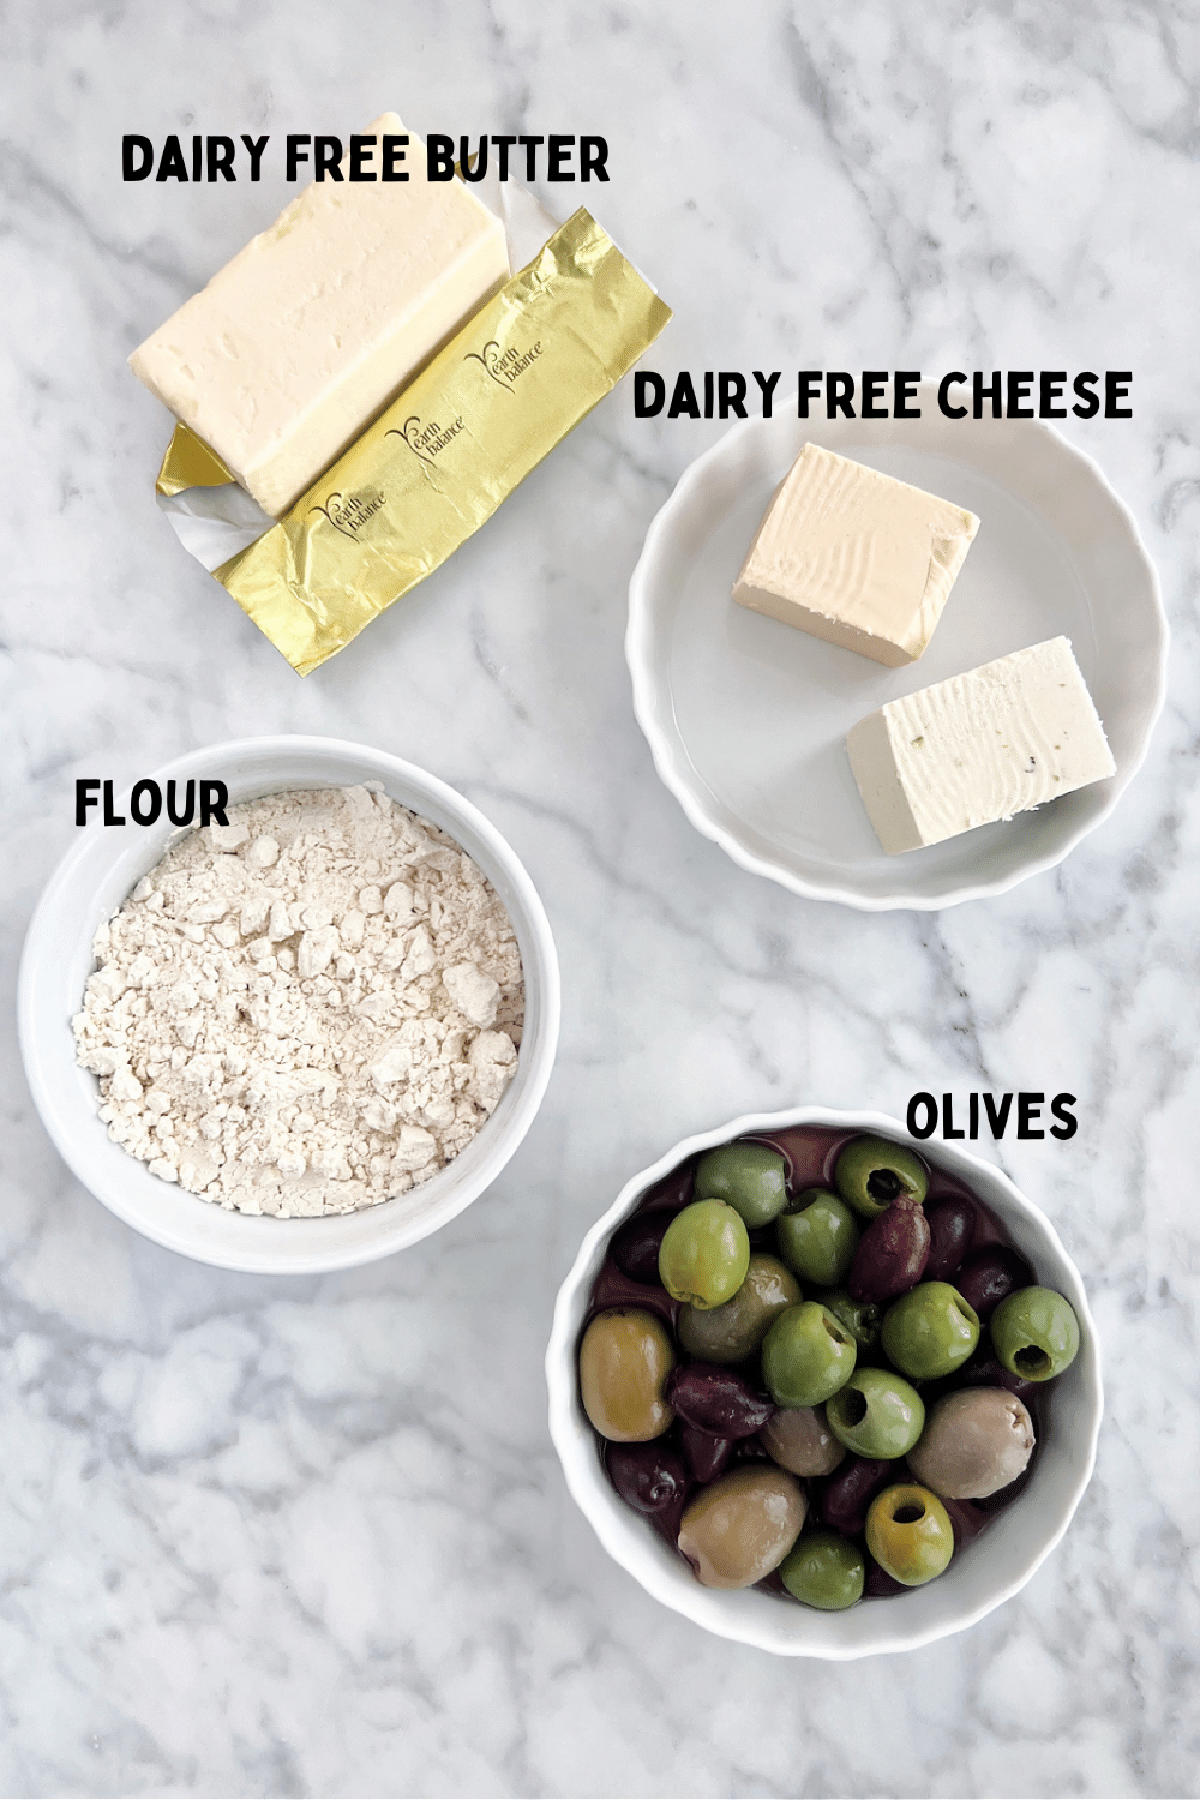 Overhead view of ingredients to make olive cheese bites: flour, olives, dairy free butter and cheese.